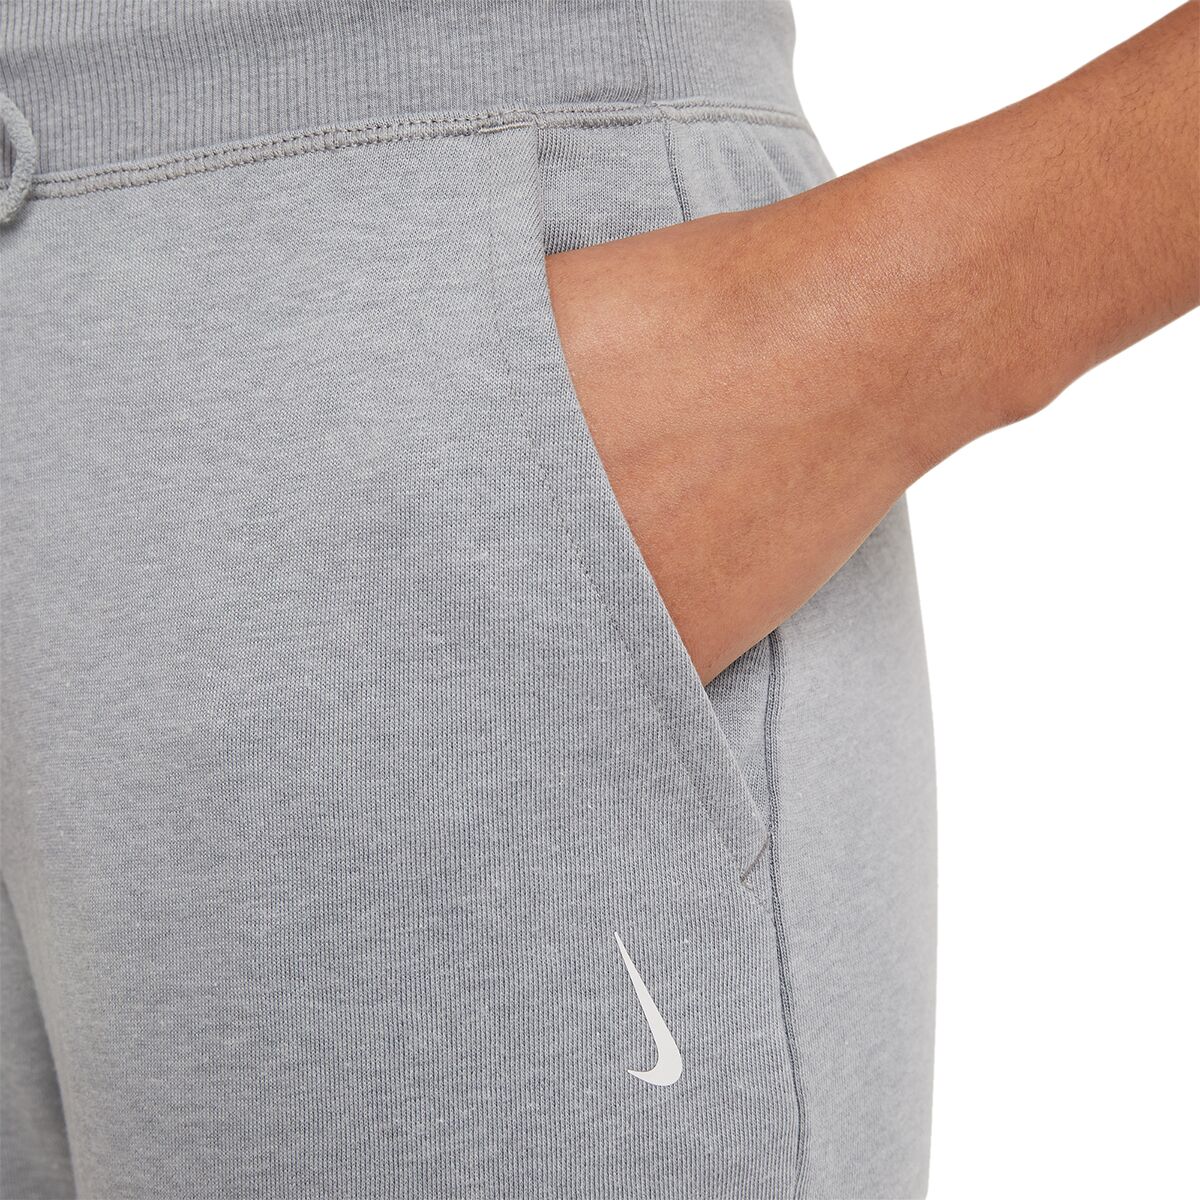 Nike Core French Terry 7/8 Jogger - Women's - Clothing